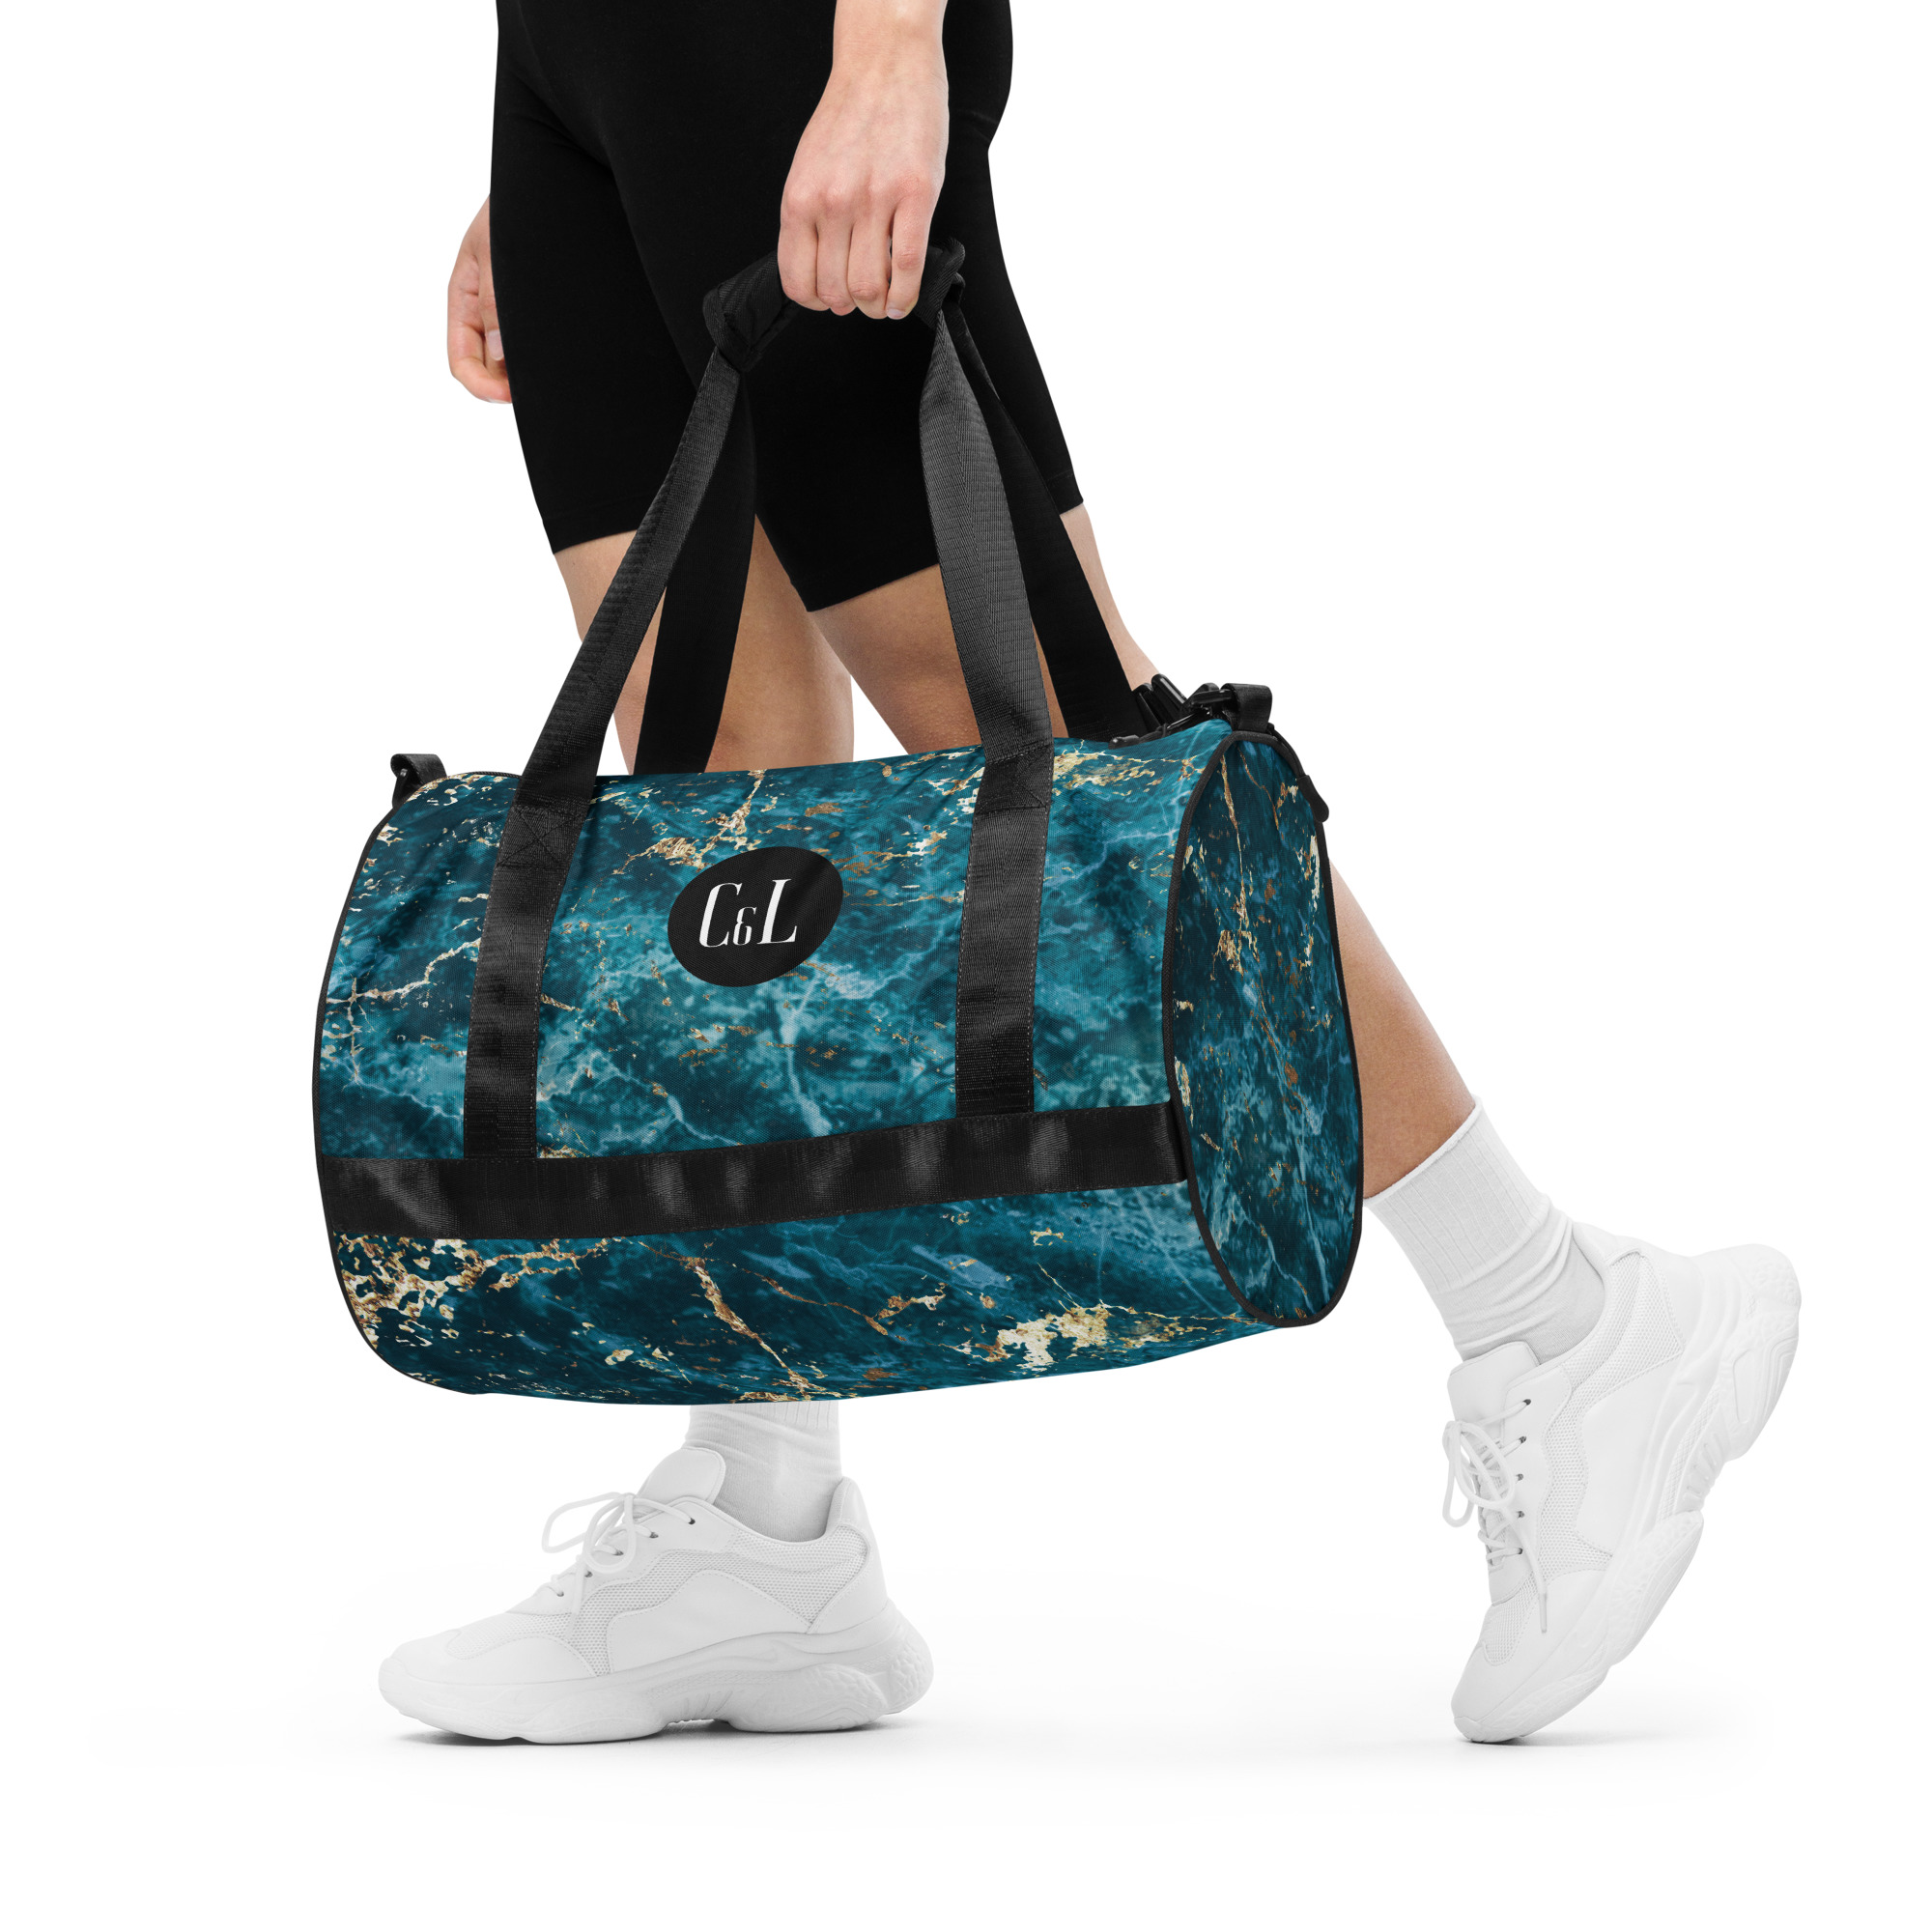 all-over-print-gym-bag-white-front-64805101a884c.jpg